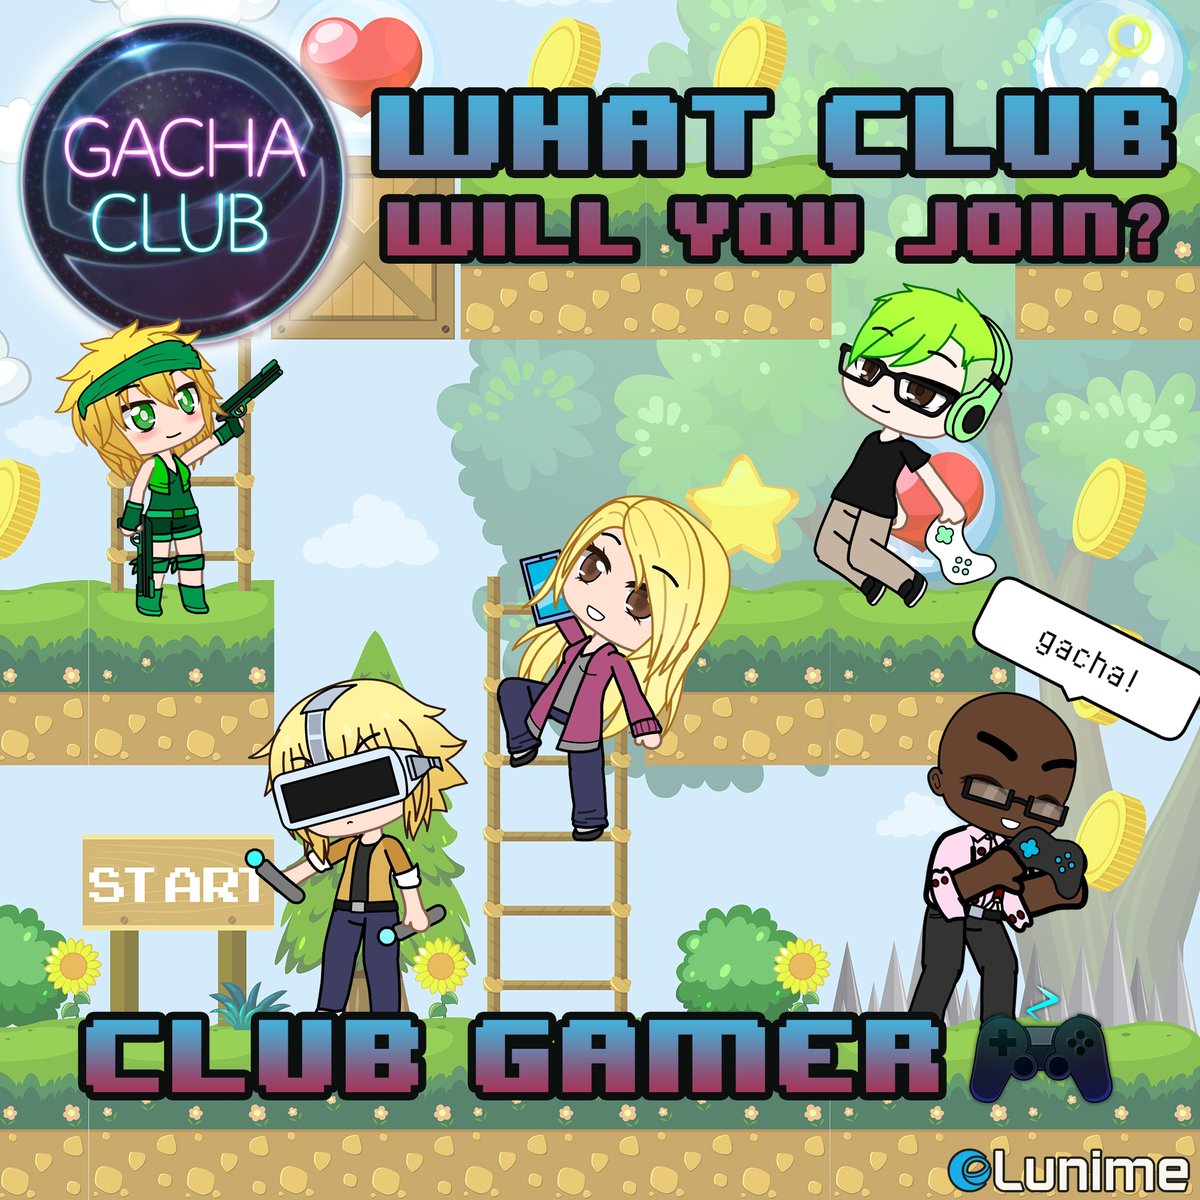 Lunime On Twitter Gacha Club Is Coming Soon What Club Will You